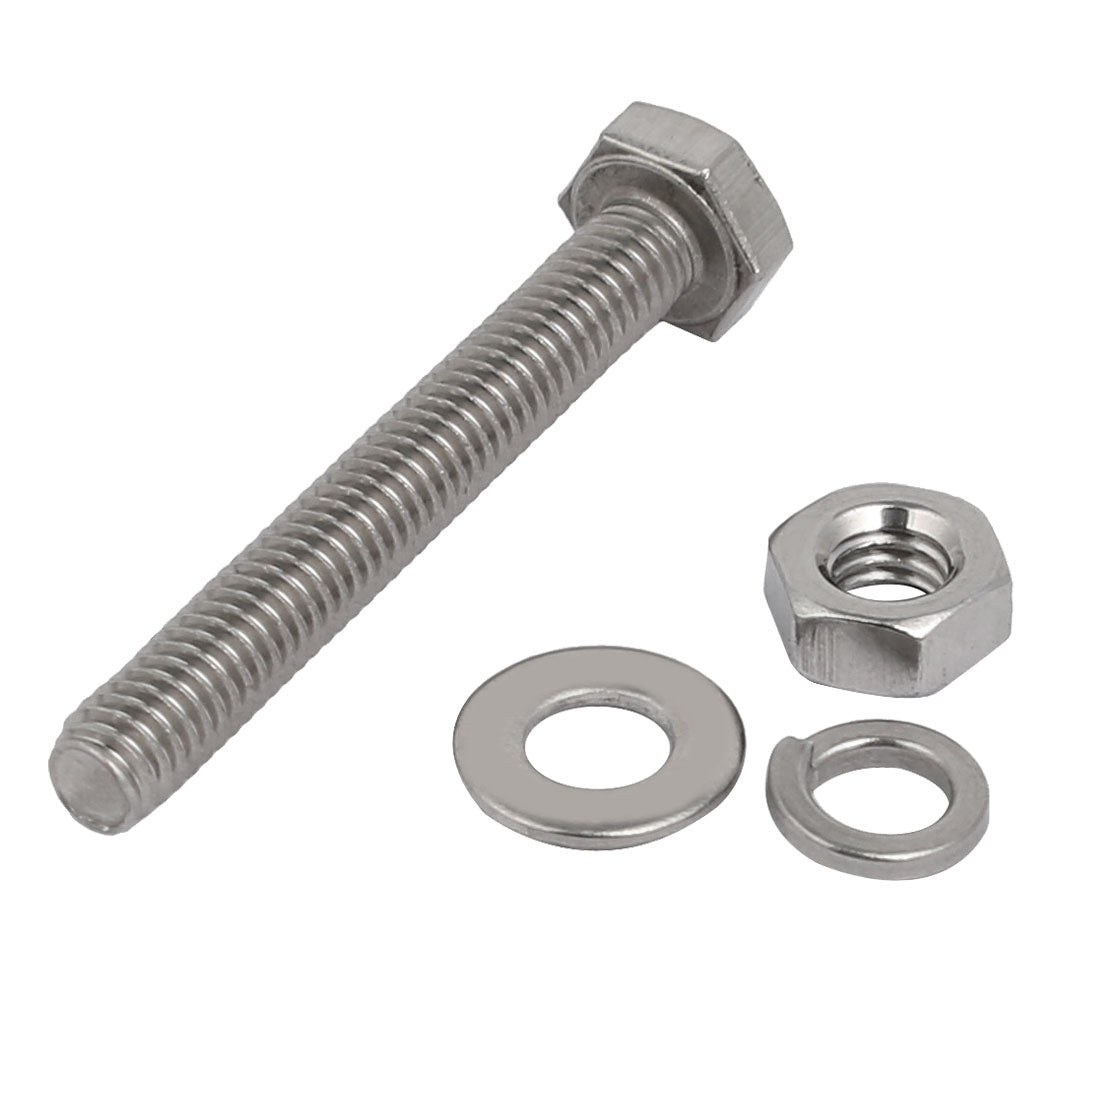 uxcell Uxcell 20pcs 304 Stainless Steel M4x30mm Hex Bolts w Nuts and Washers Assortment Kit